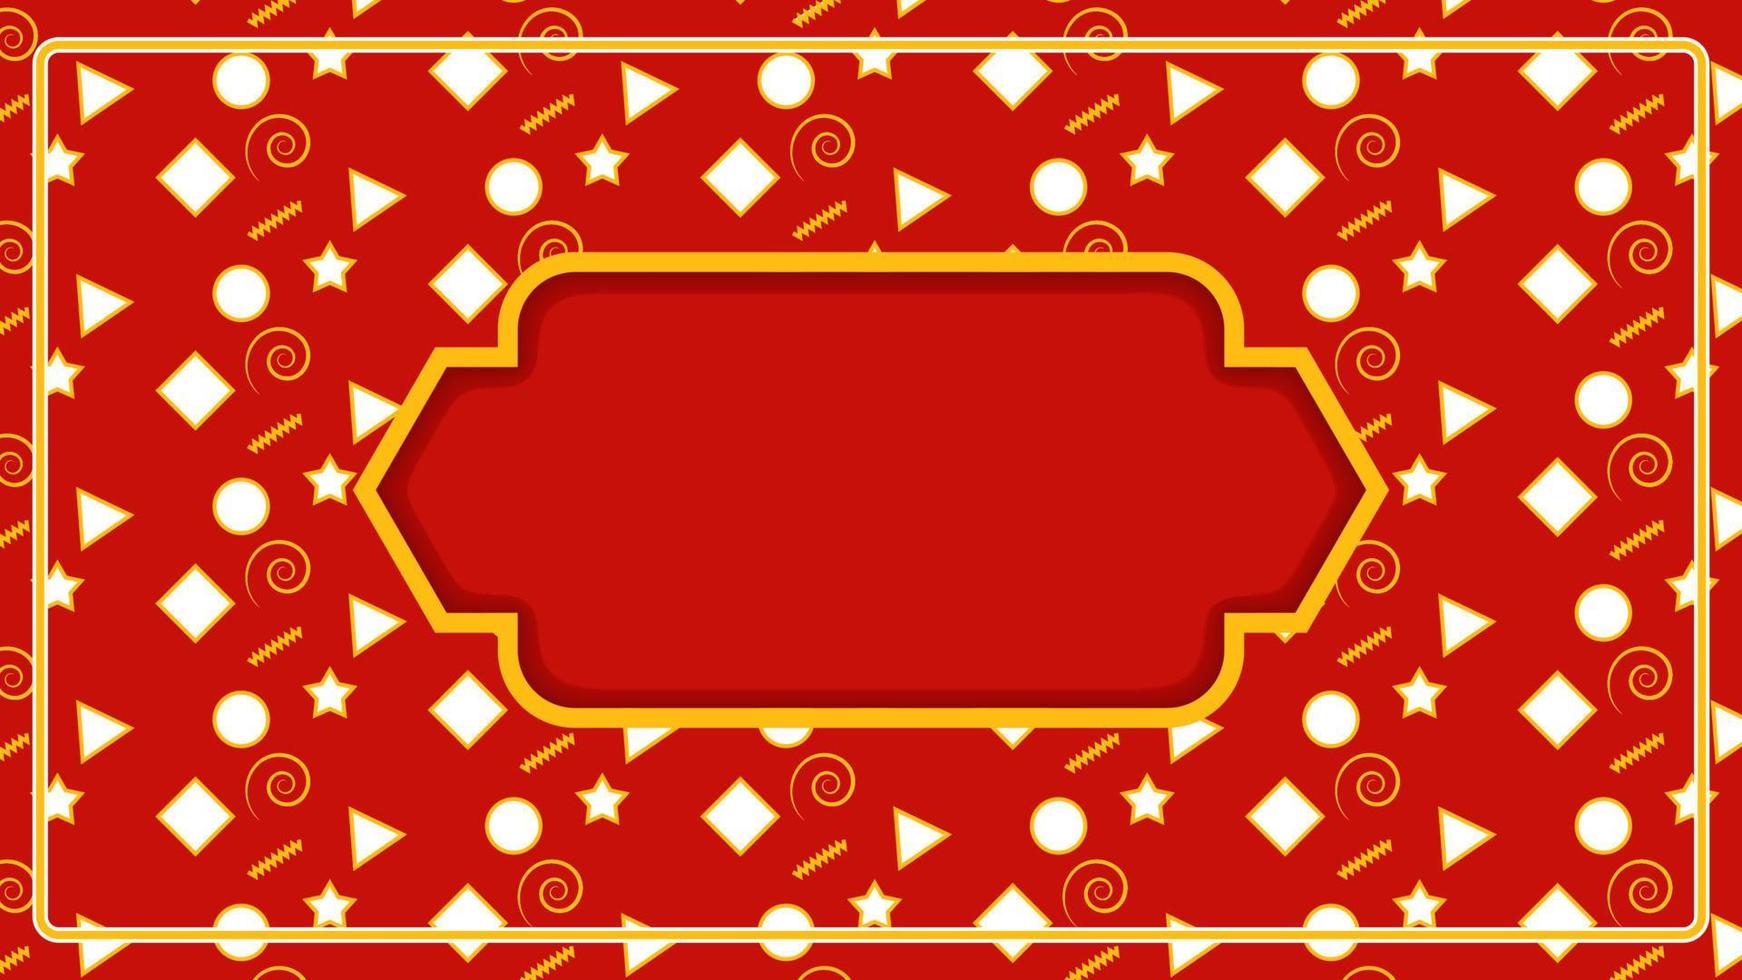 Abstract basic shape background in red colors vector